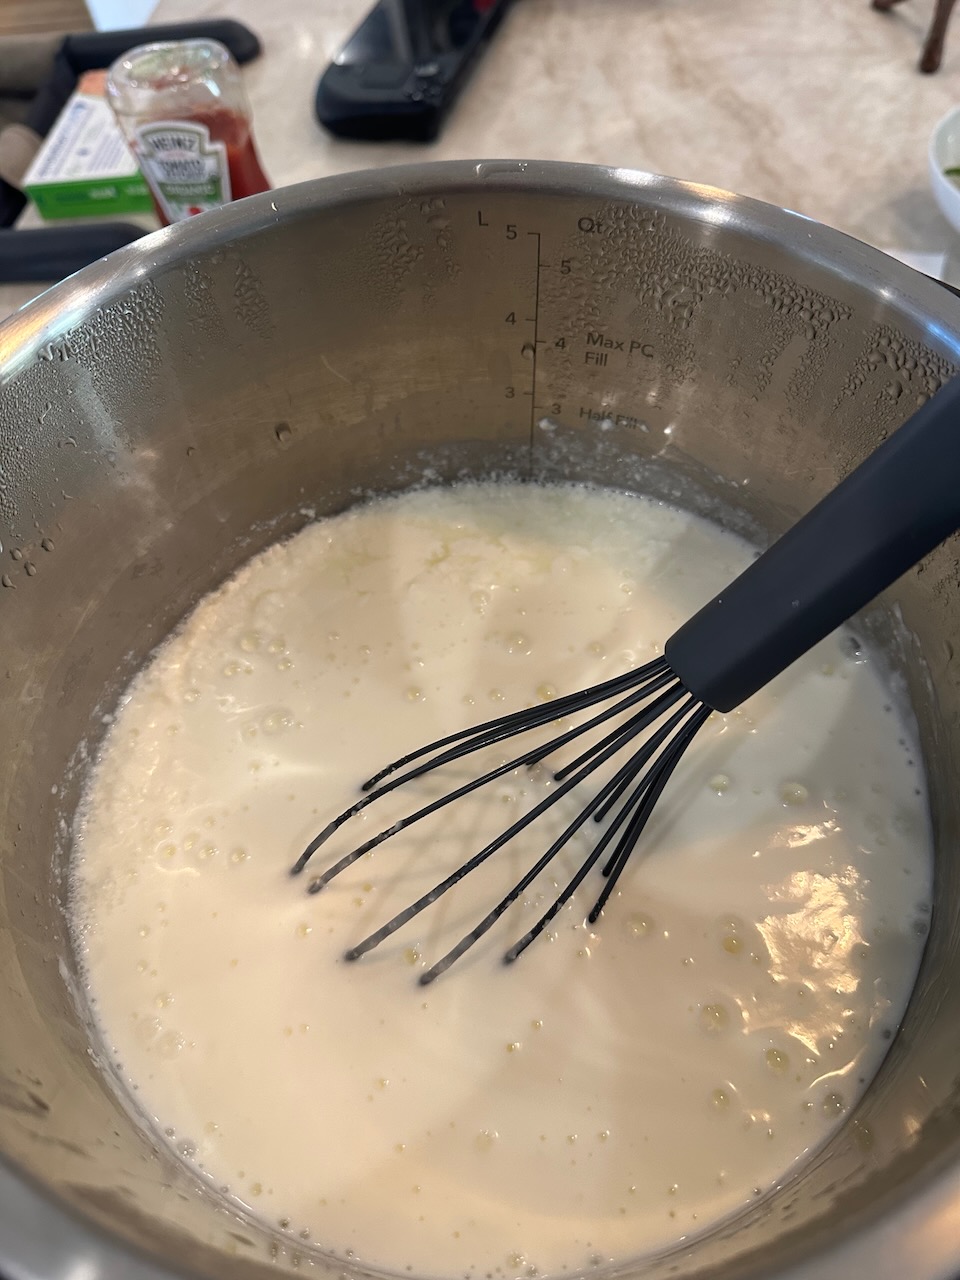 top down view of a stainless steel pot filled with white yogurt, a whisk is partially submerged in it